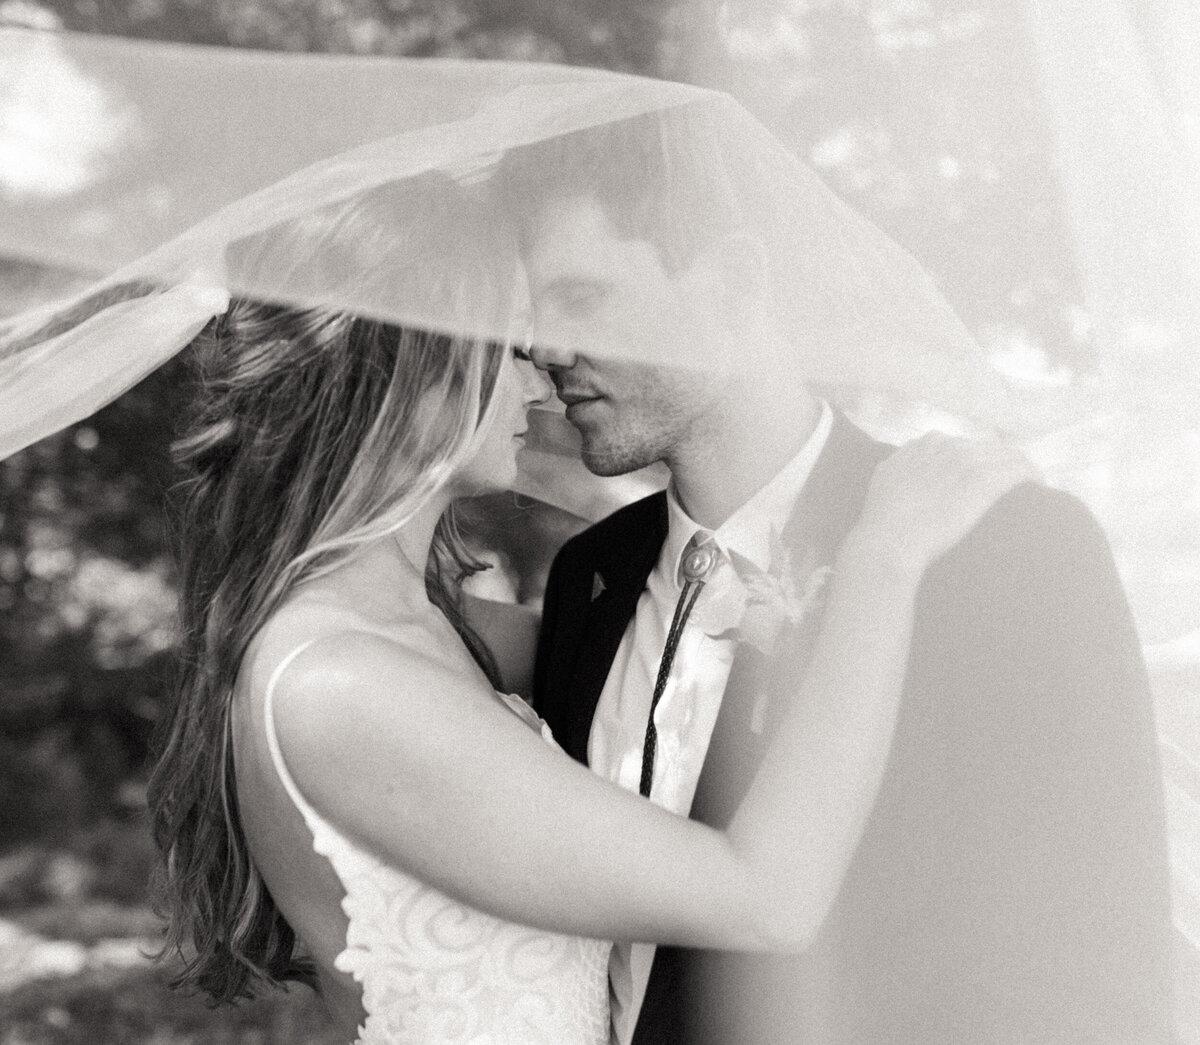 Bride and groom embracing each other as the wind blows her cathedral veil over them